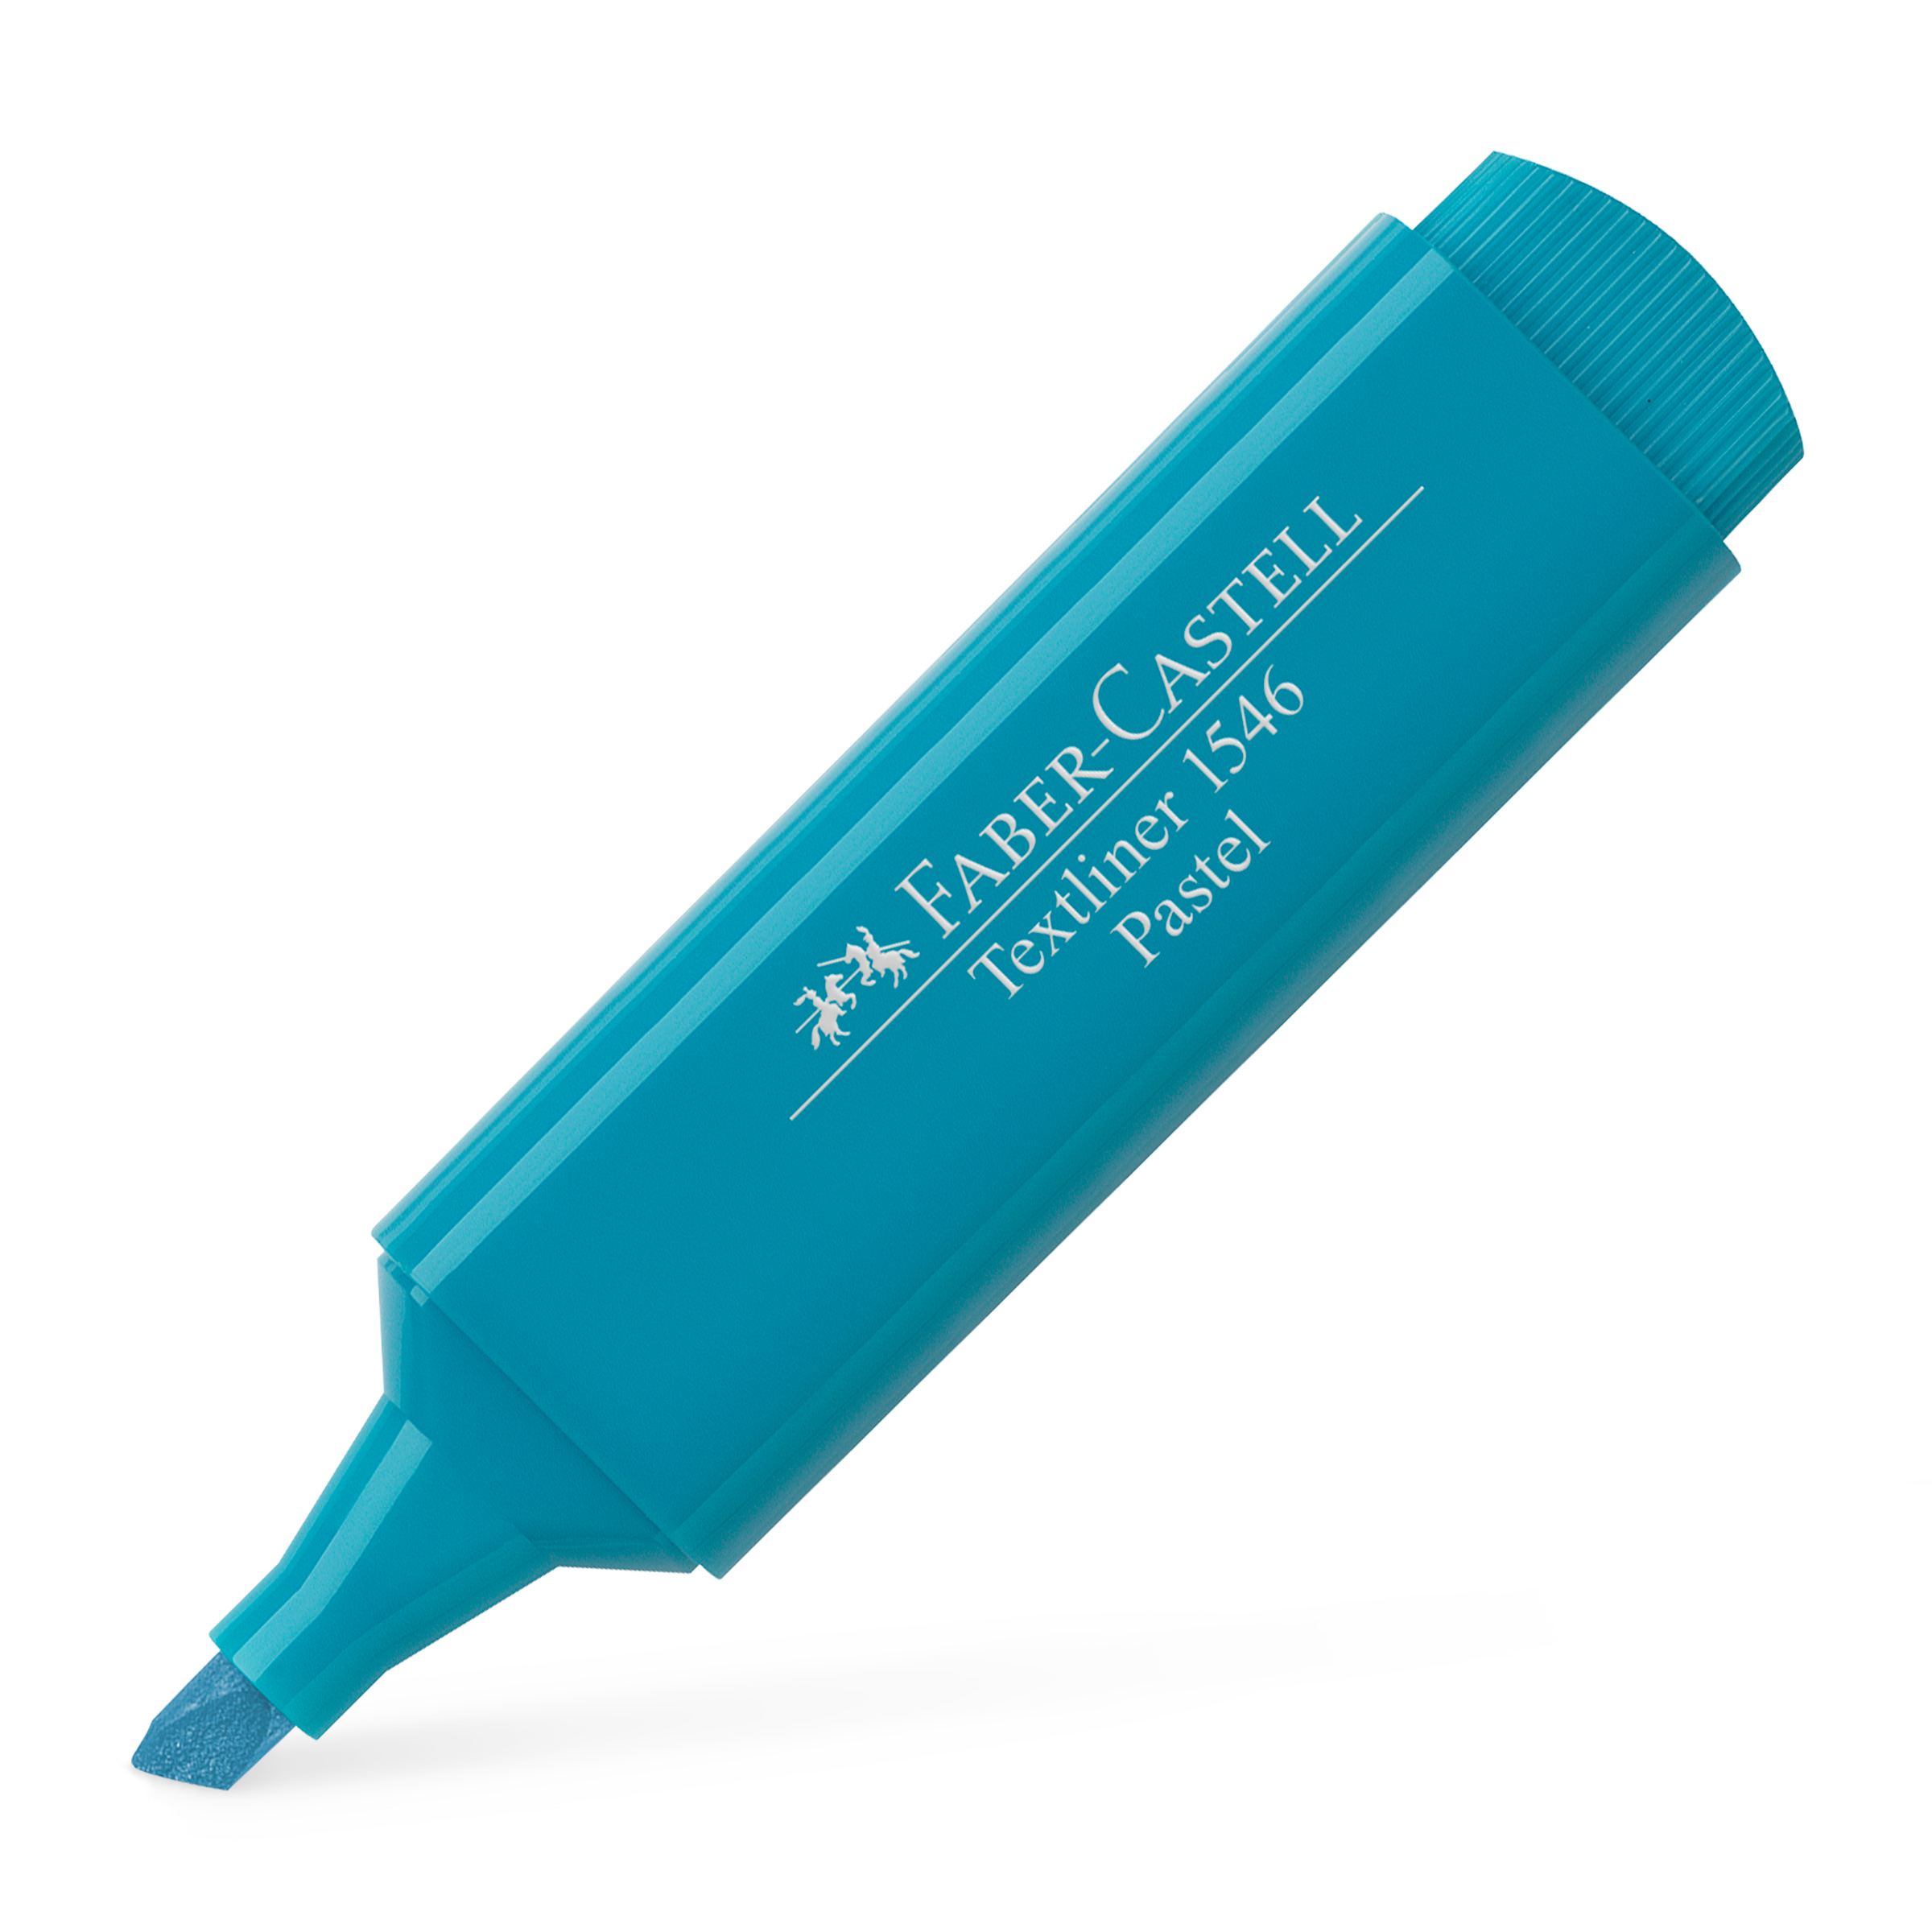 FABER-CASTELL Textliner 1546 154658 pastell, turqoise